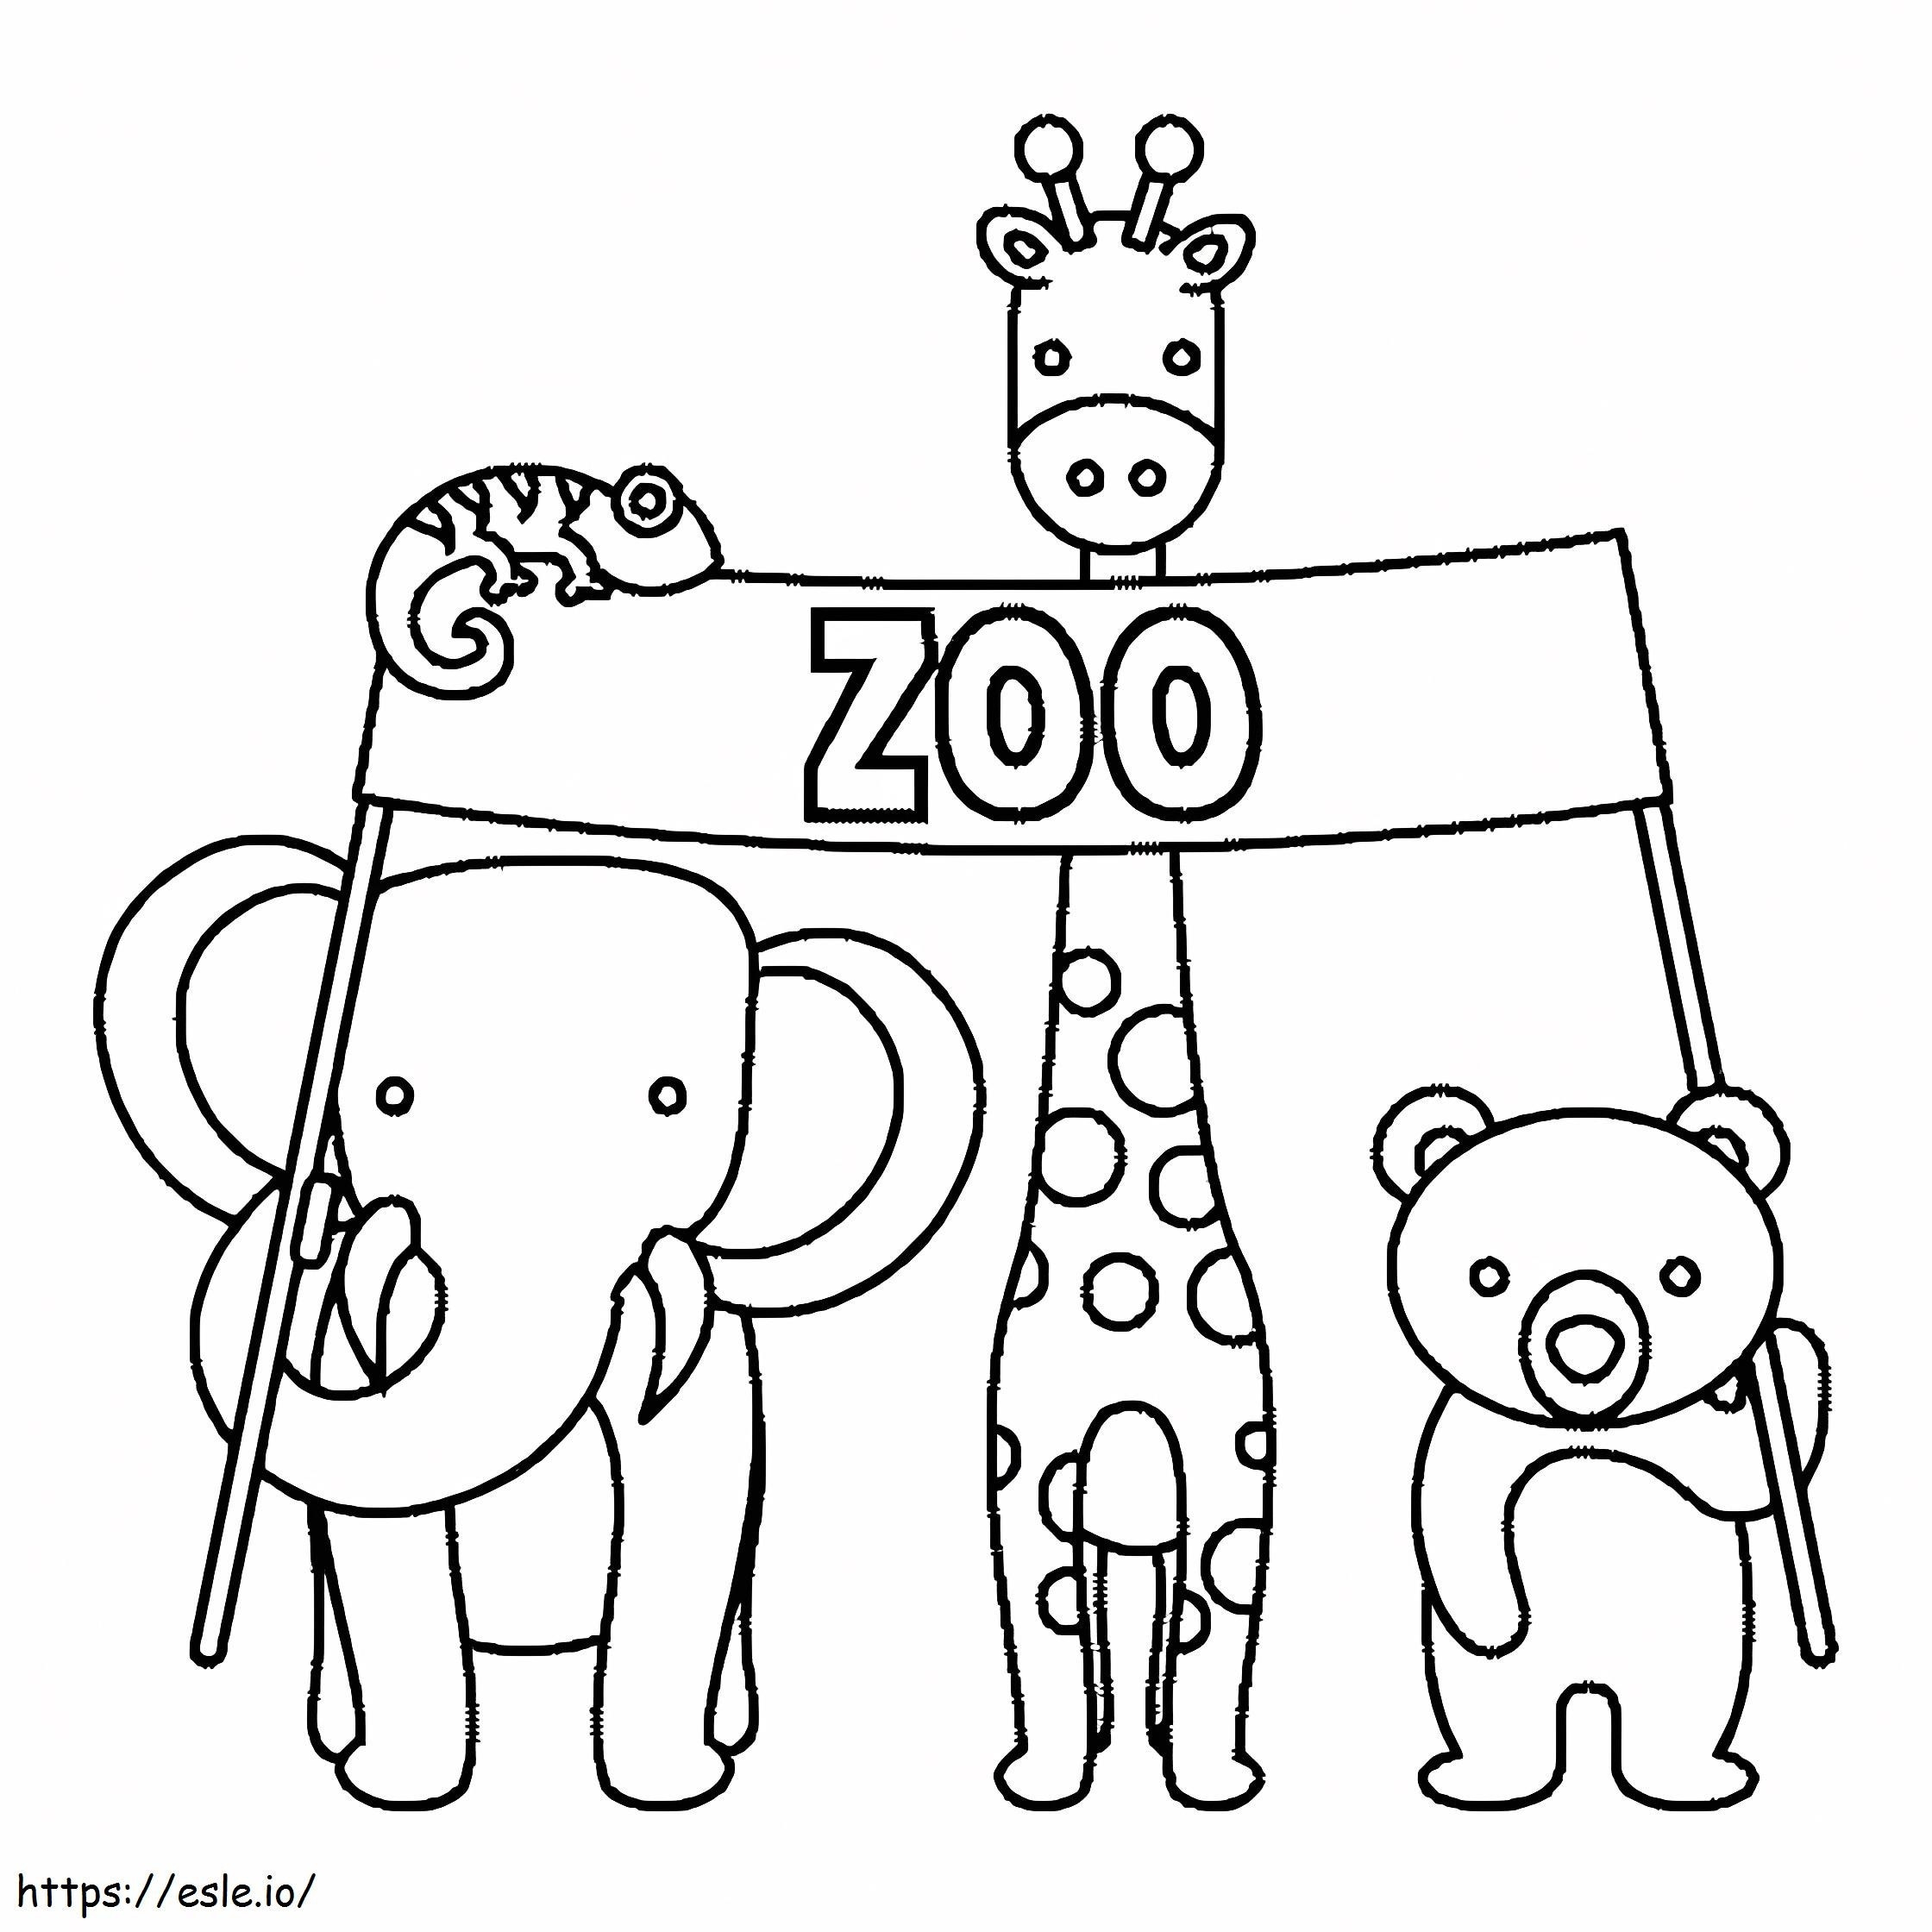 Four Animals In The Zoo coloring page